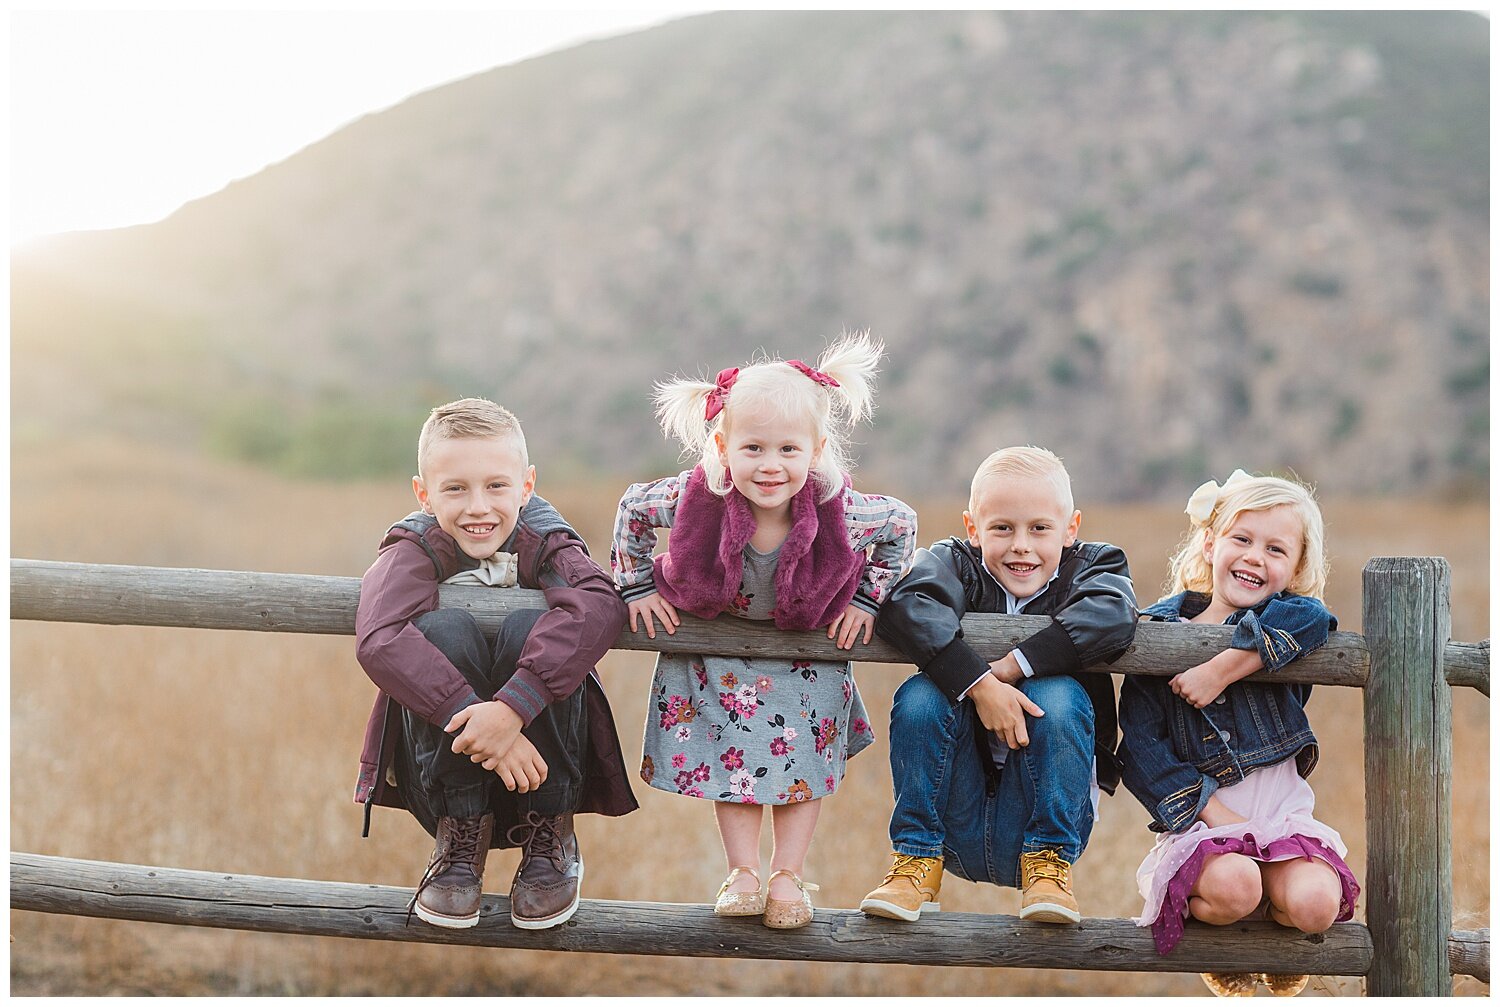 The Metcalfe Family Portraits at Mission Trails